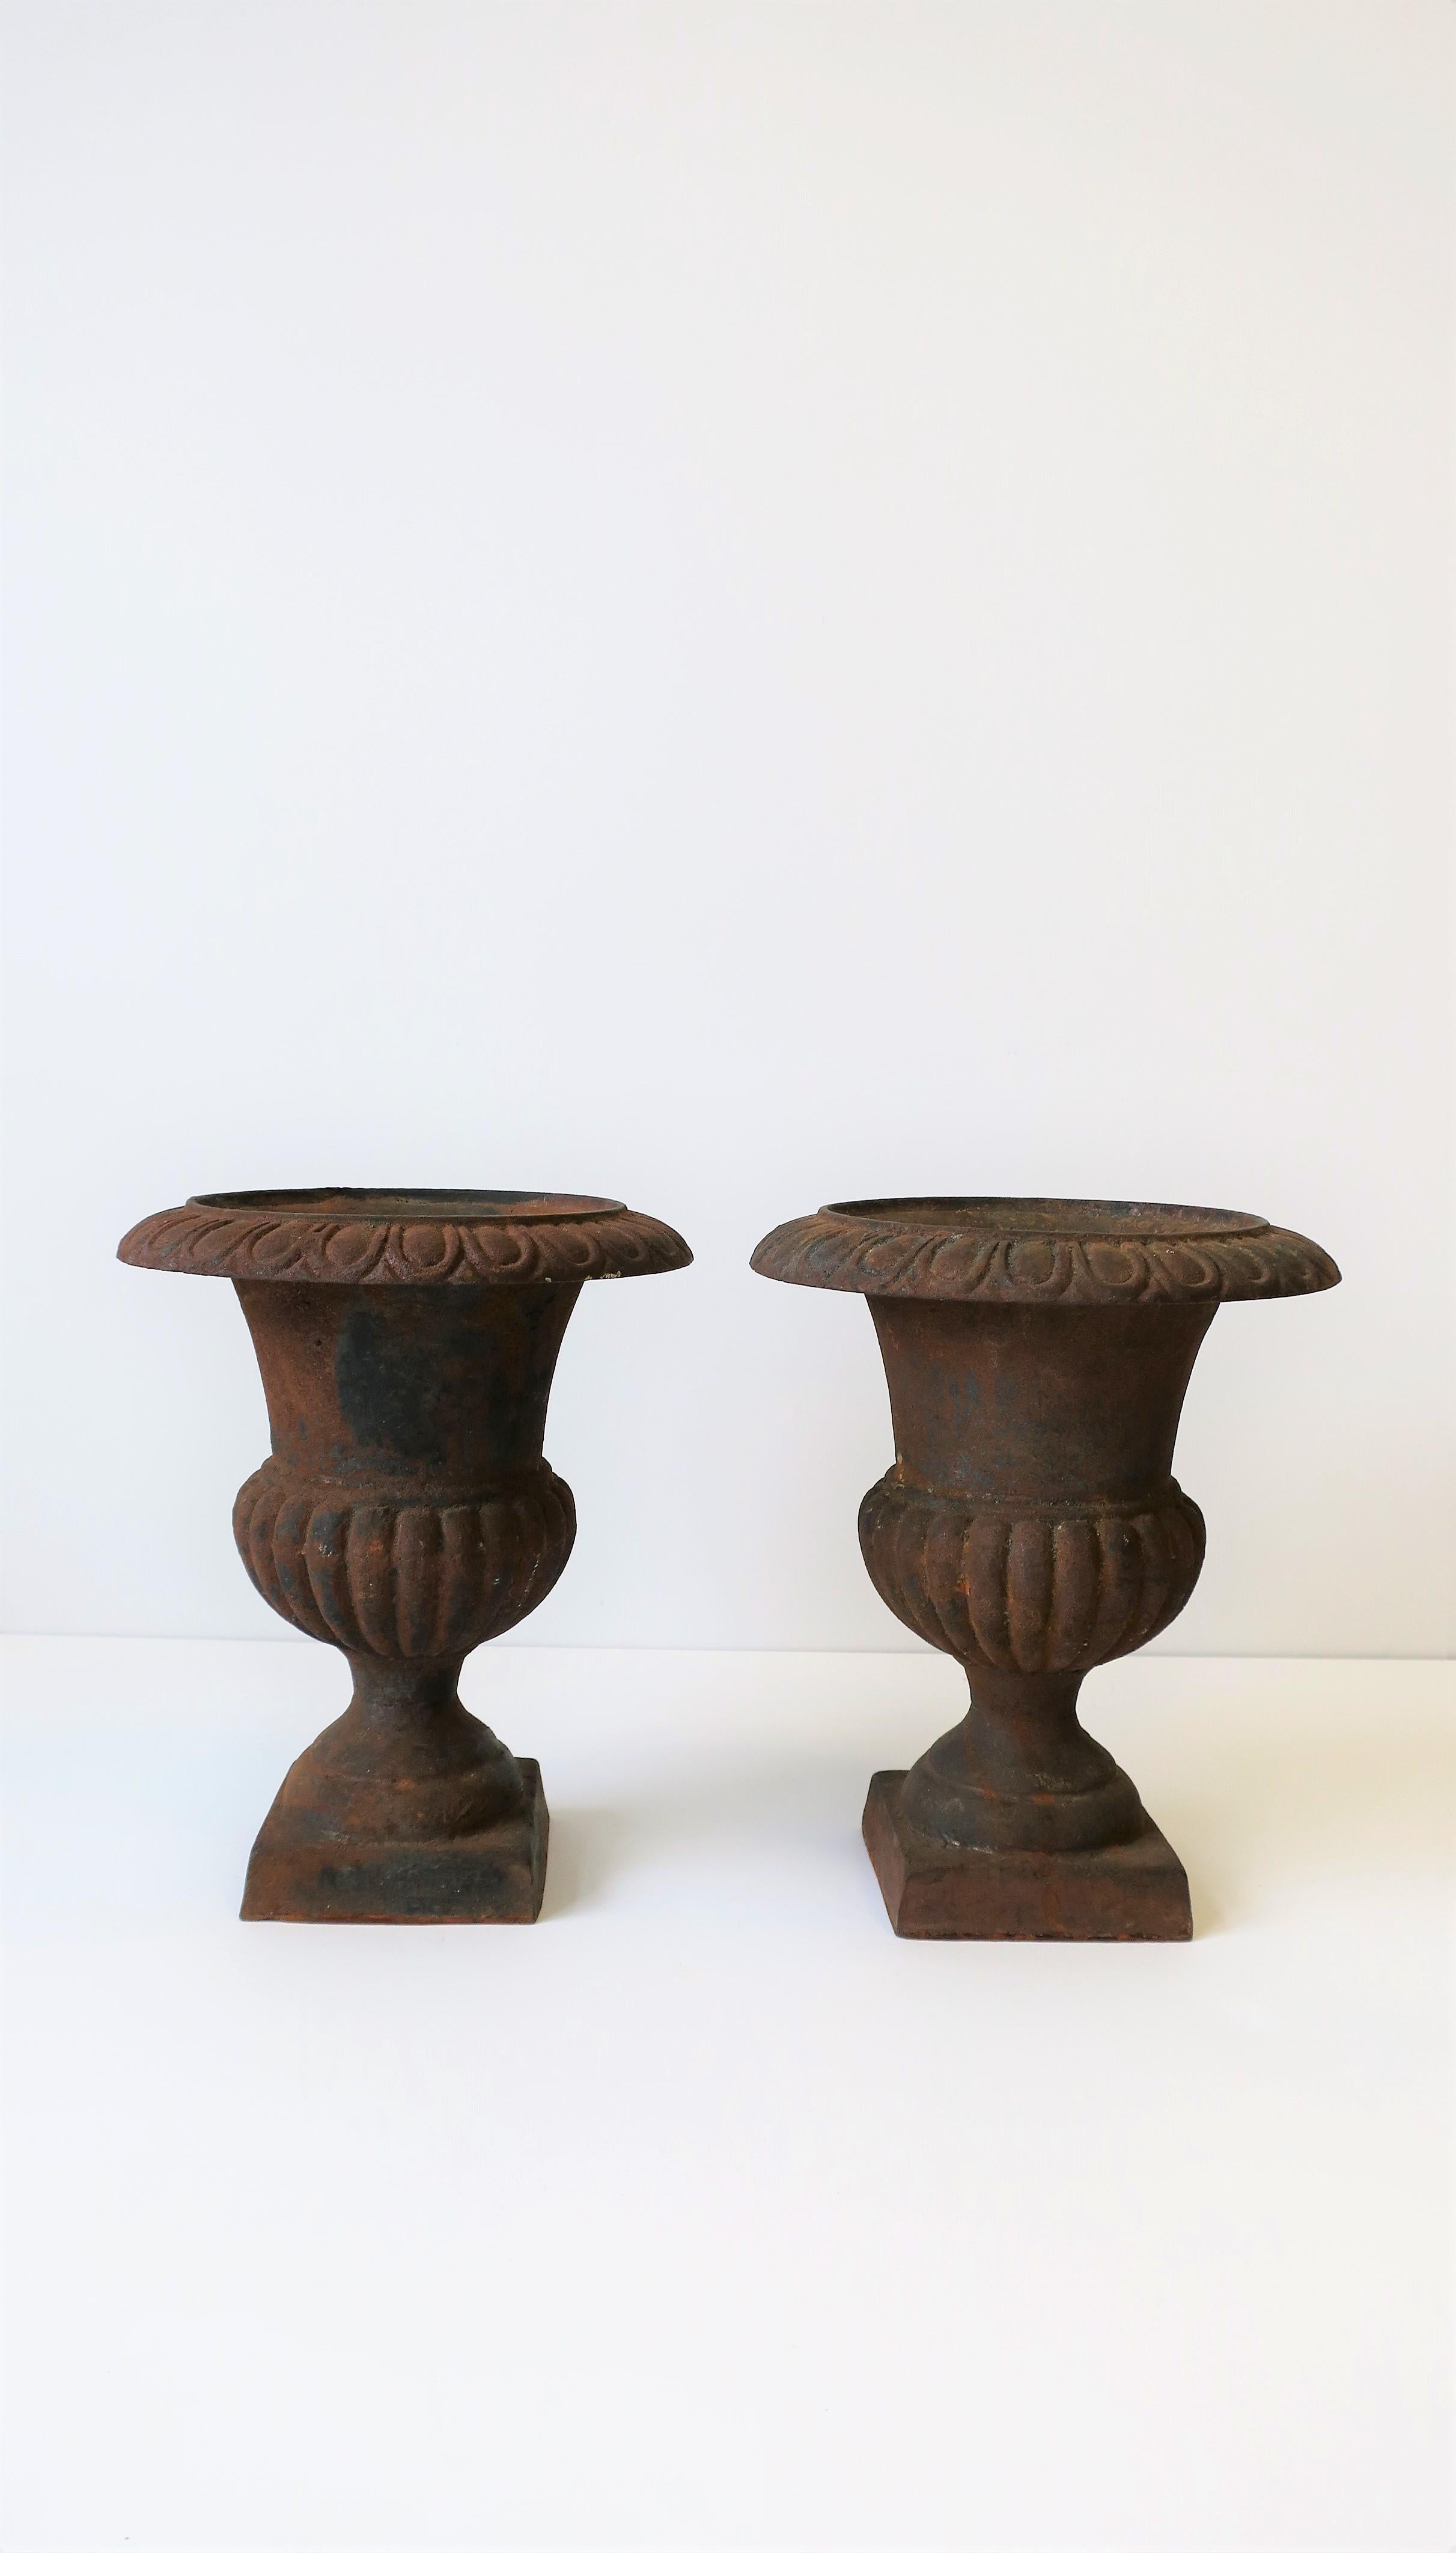 A beautiful pair of weathered iron urns plant or flowerpot cachepot jardinieres with square pedestal bases in the Neoclassical style, circa 20th century, possibly Europe/France. Substantial in weight, use indoors or outdoors garden, patio, etc. Pair